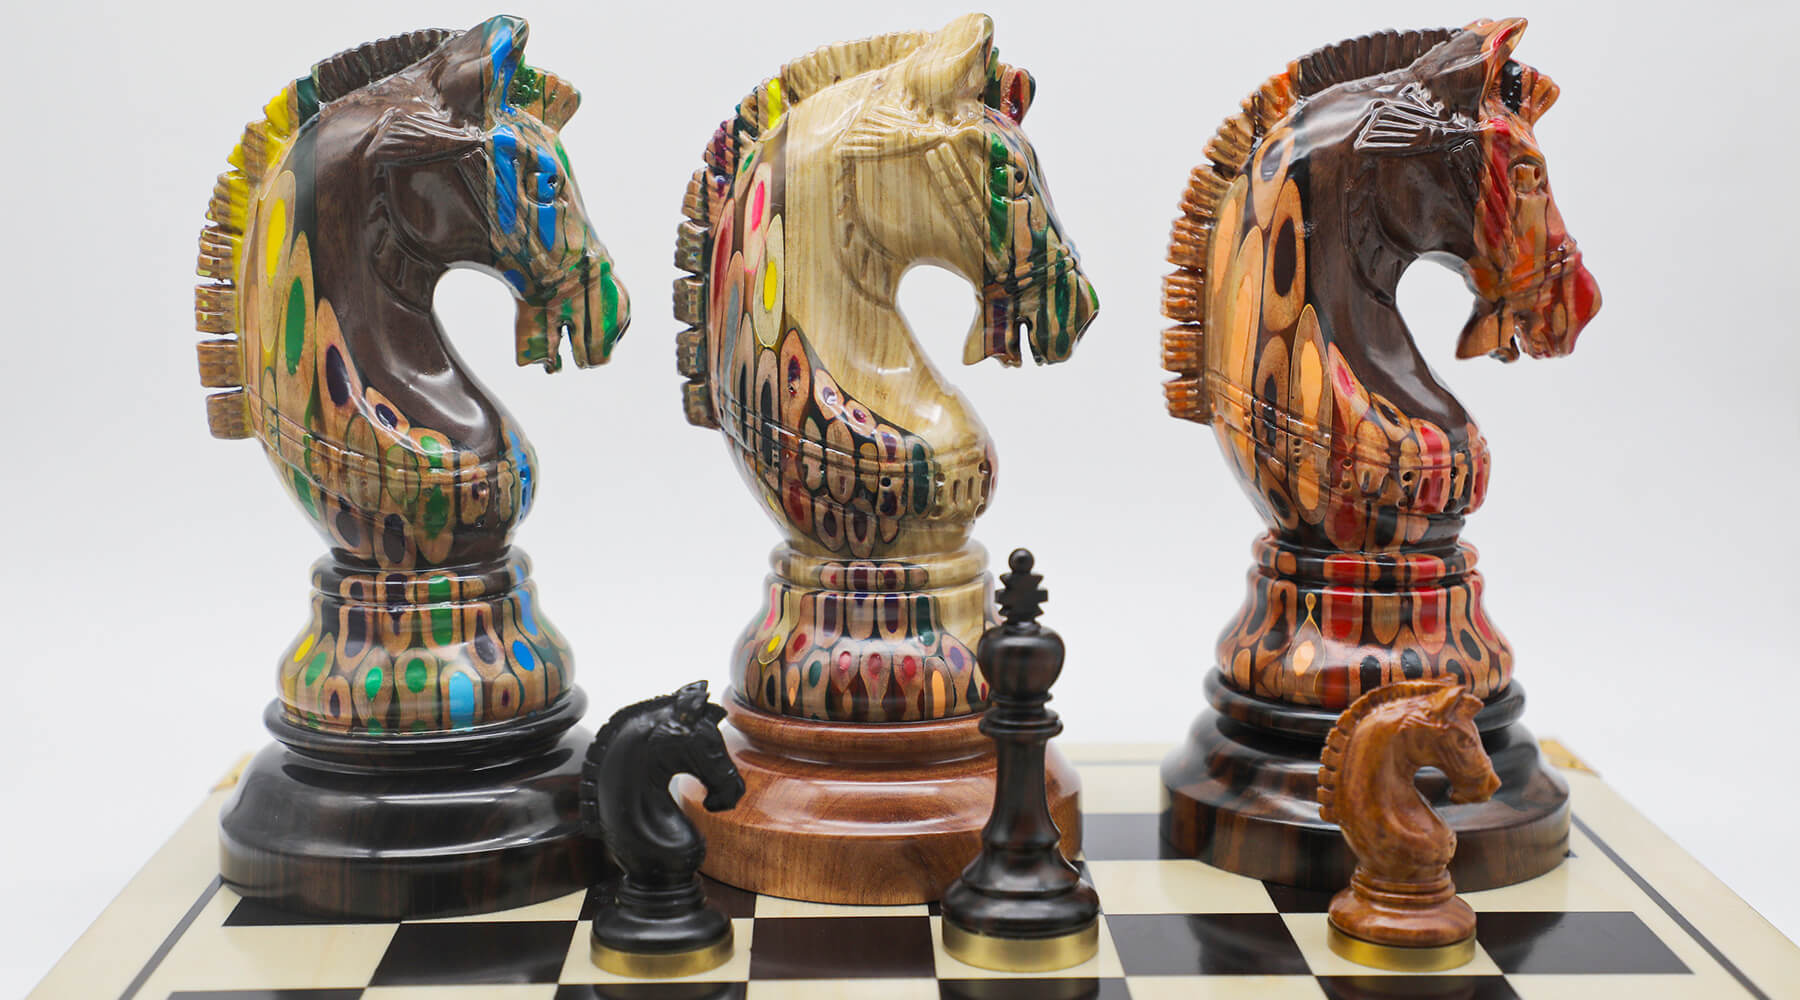 Luxury Wooden Ancient Egyptian Theme Chess Set - Henry Chess Sets